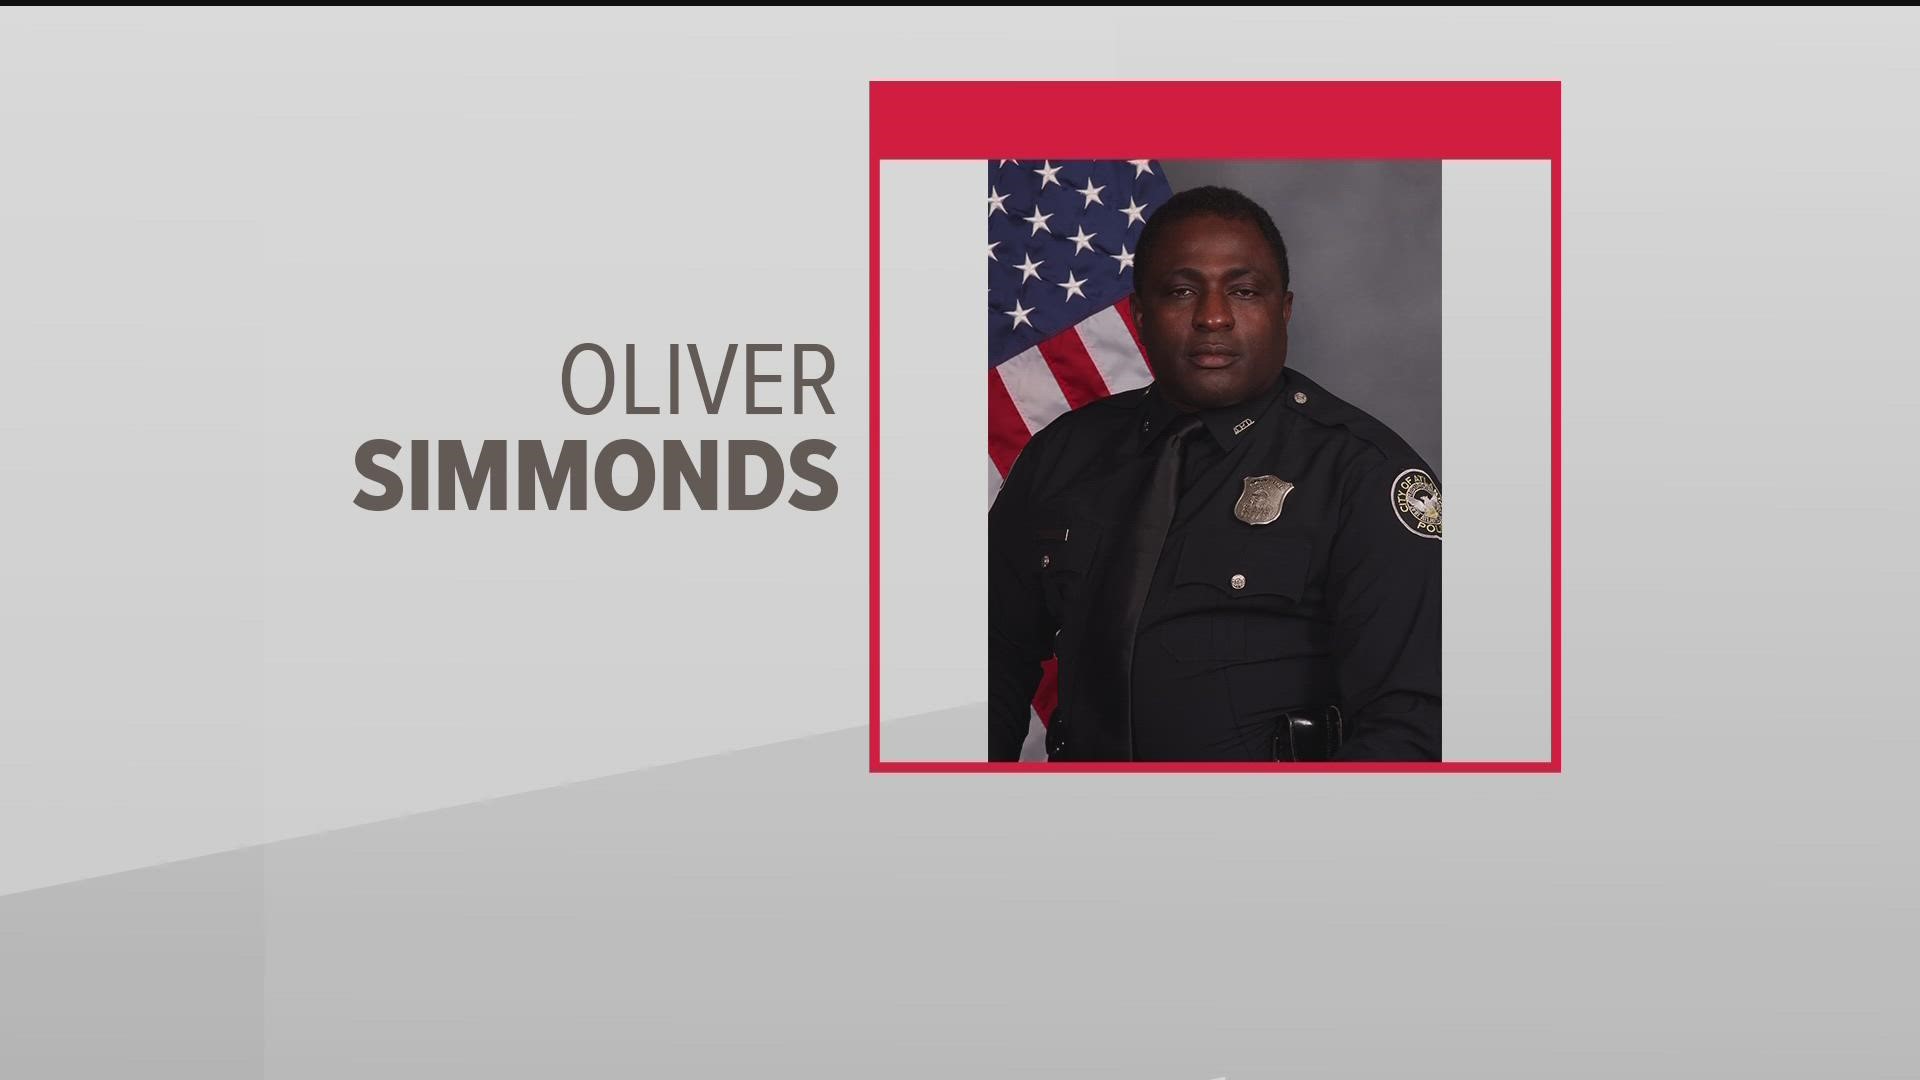 Officer Oliver Simmonds was indicted in October in the teen's 2019 death. Atlanta Police Department confirmed Simmonds retired Nov. 9.